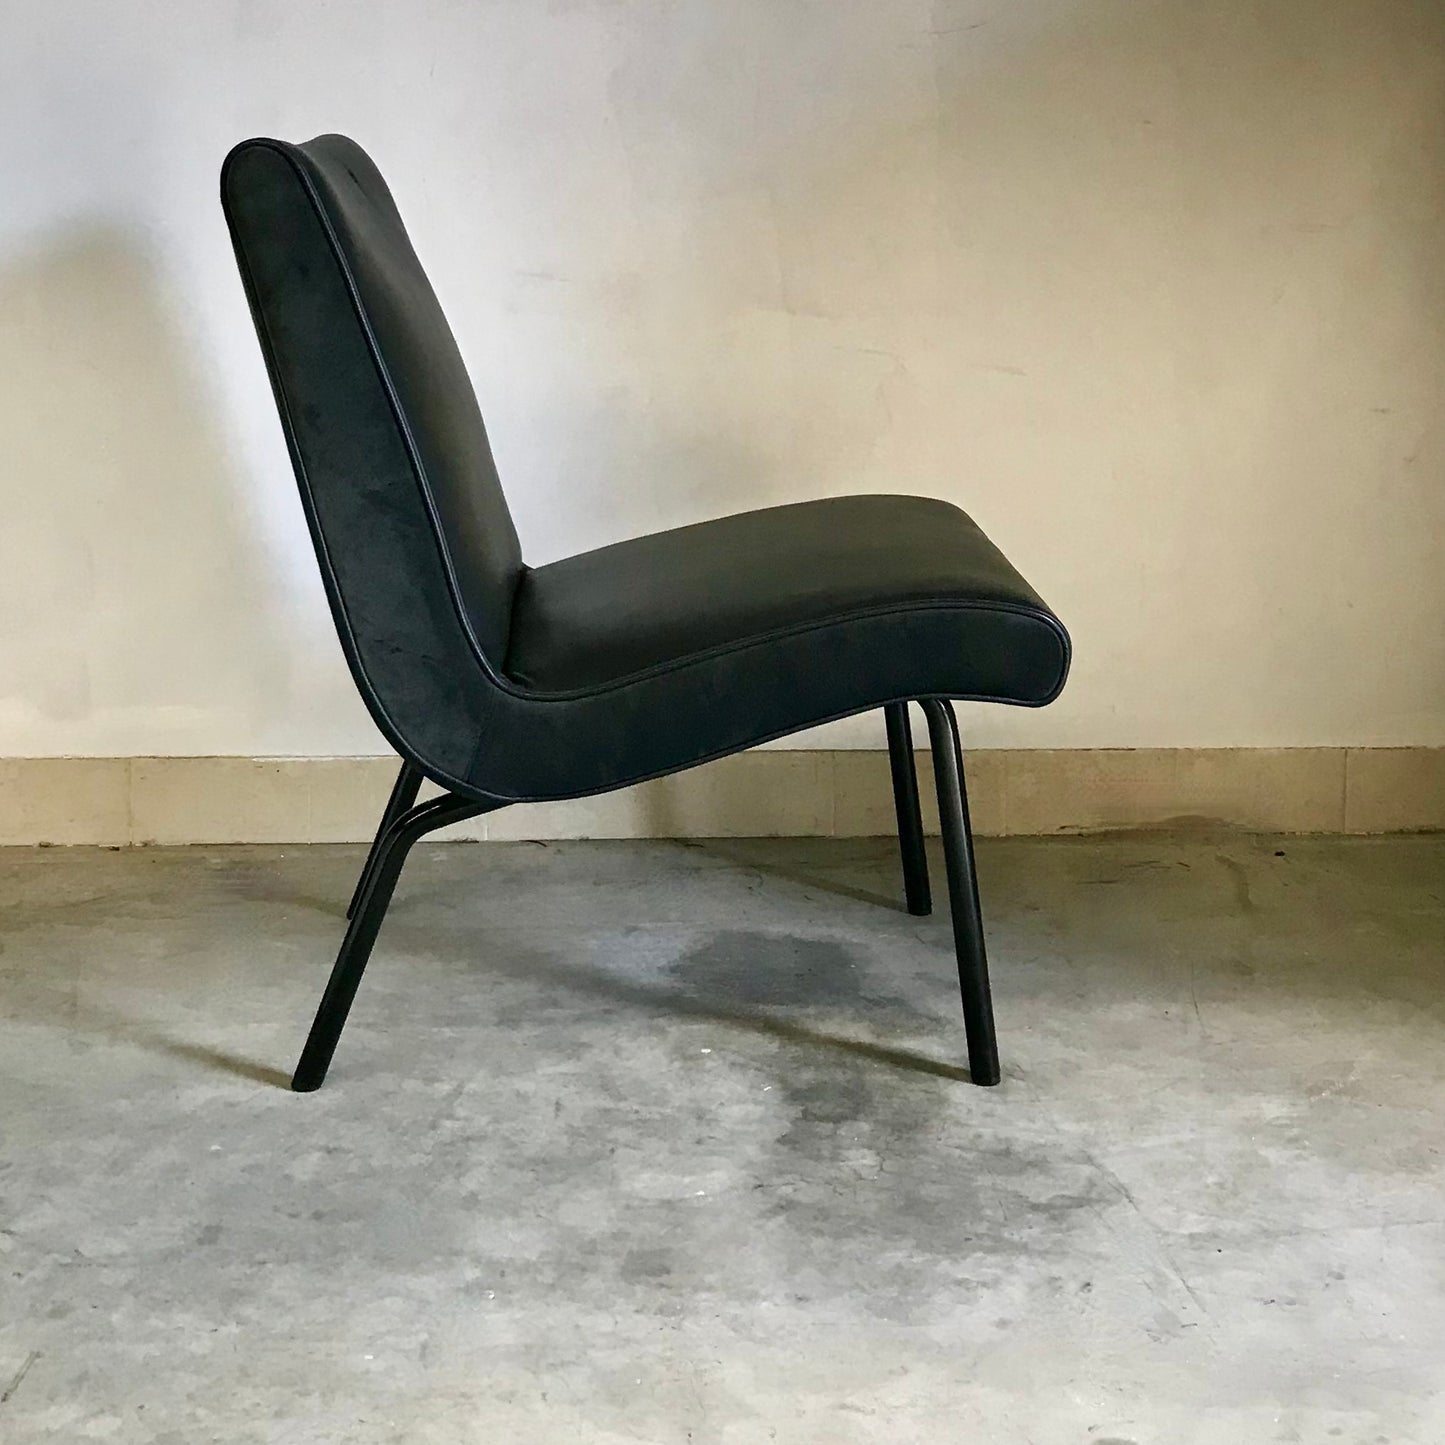 Vostra Chair by Walter Knoll